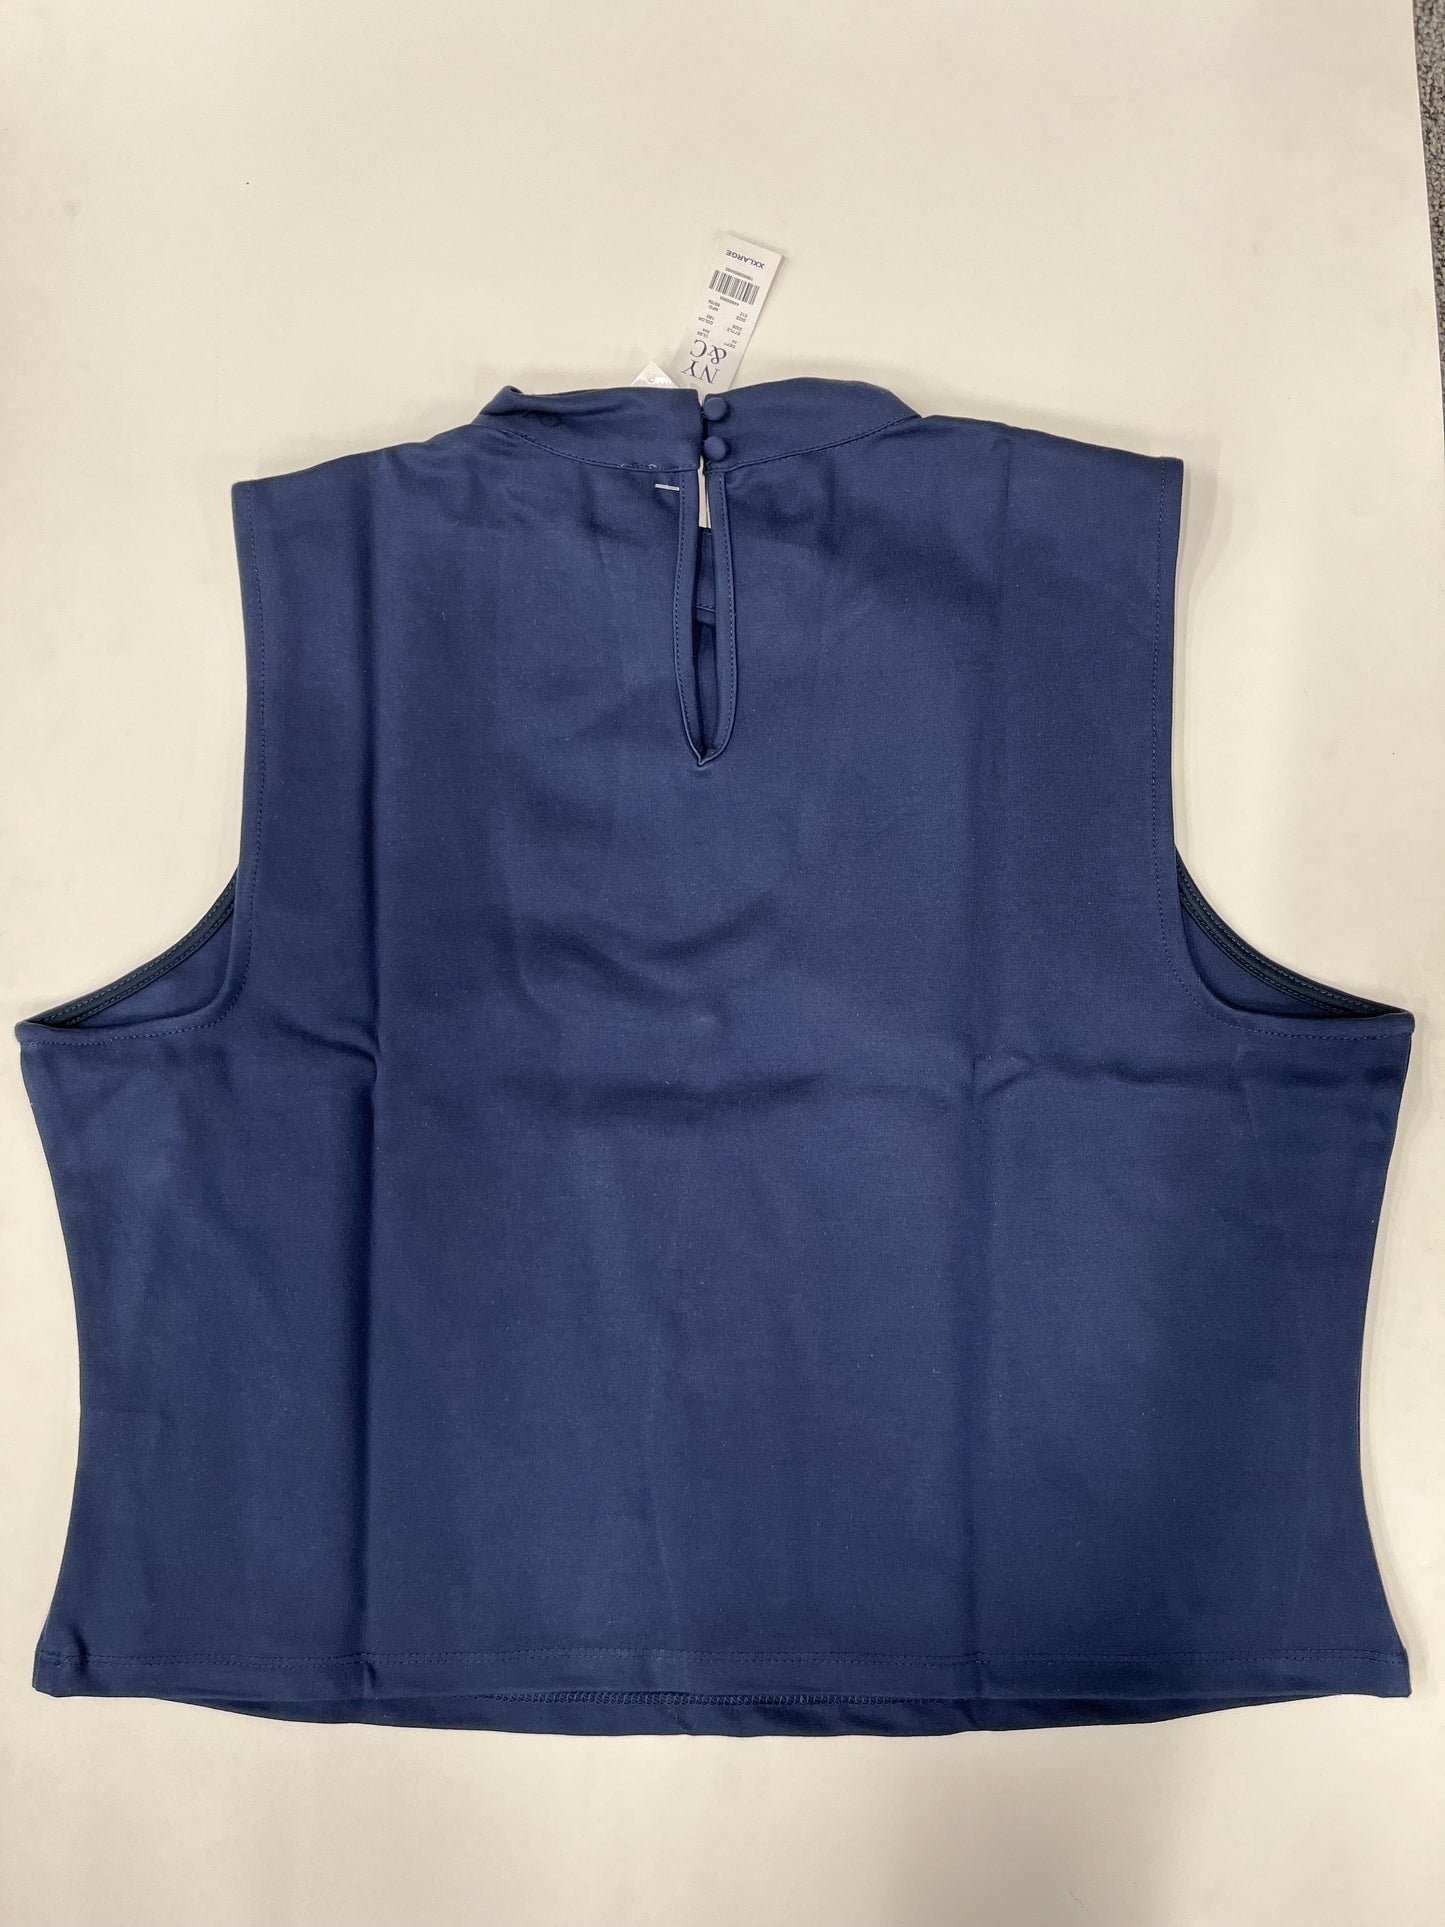 Top Sleeveless By New York And Co NWT Size: 2x